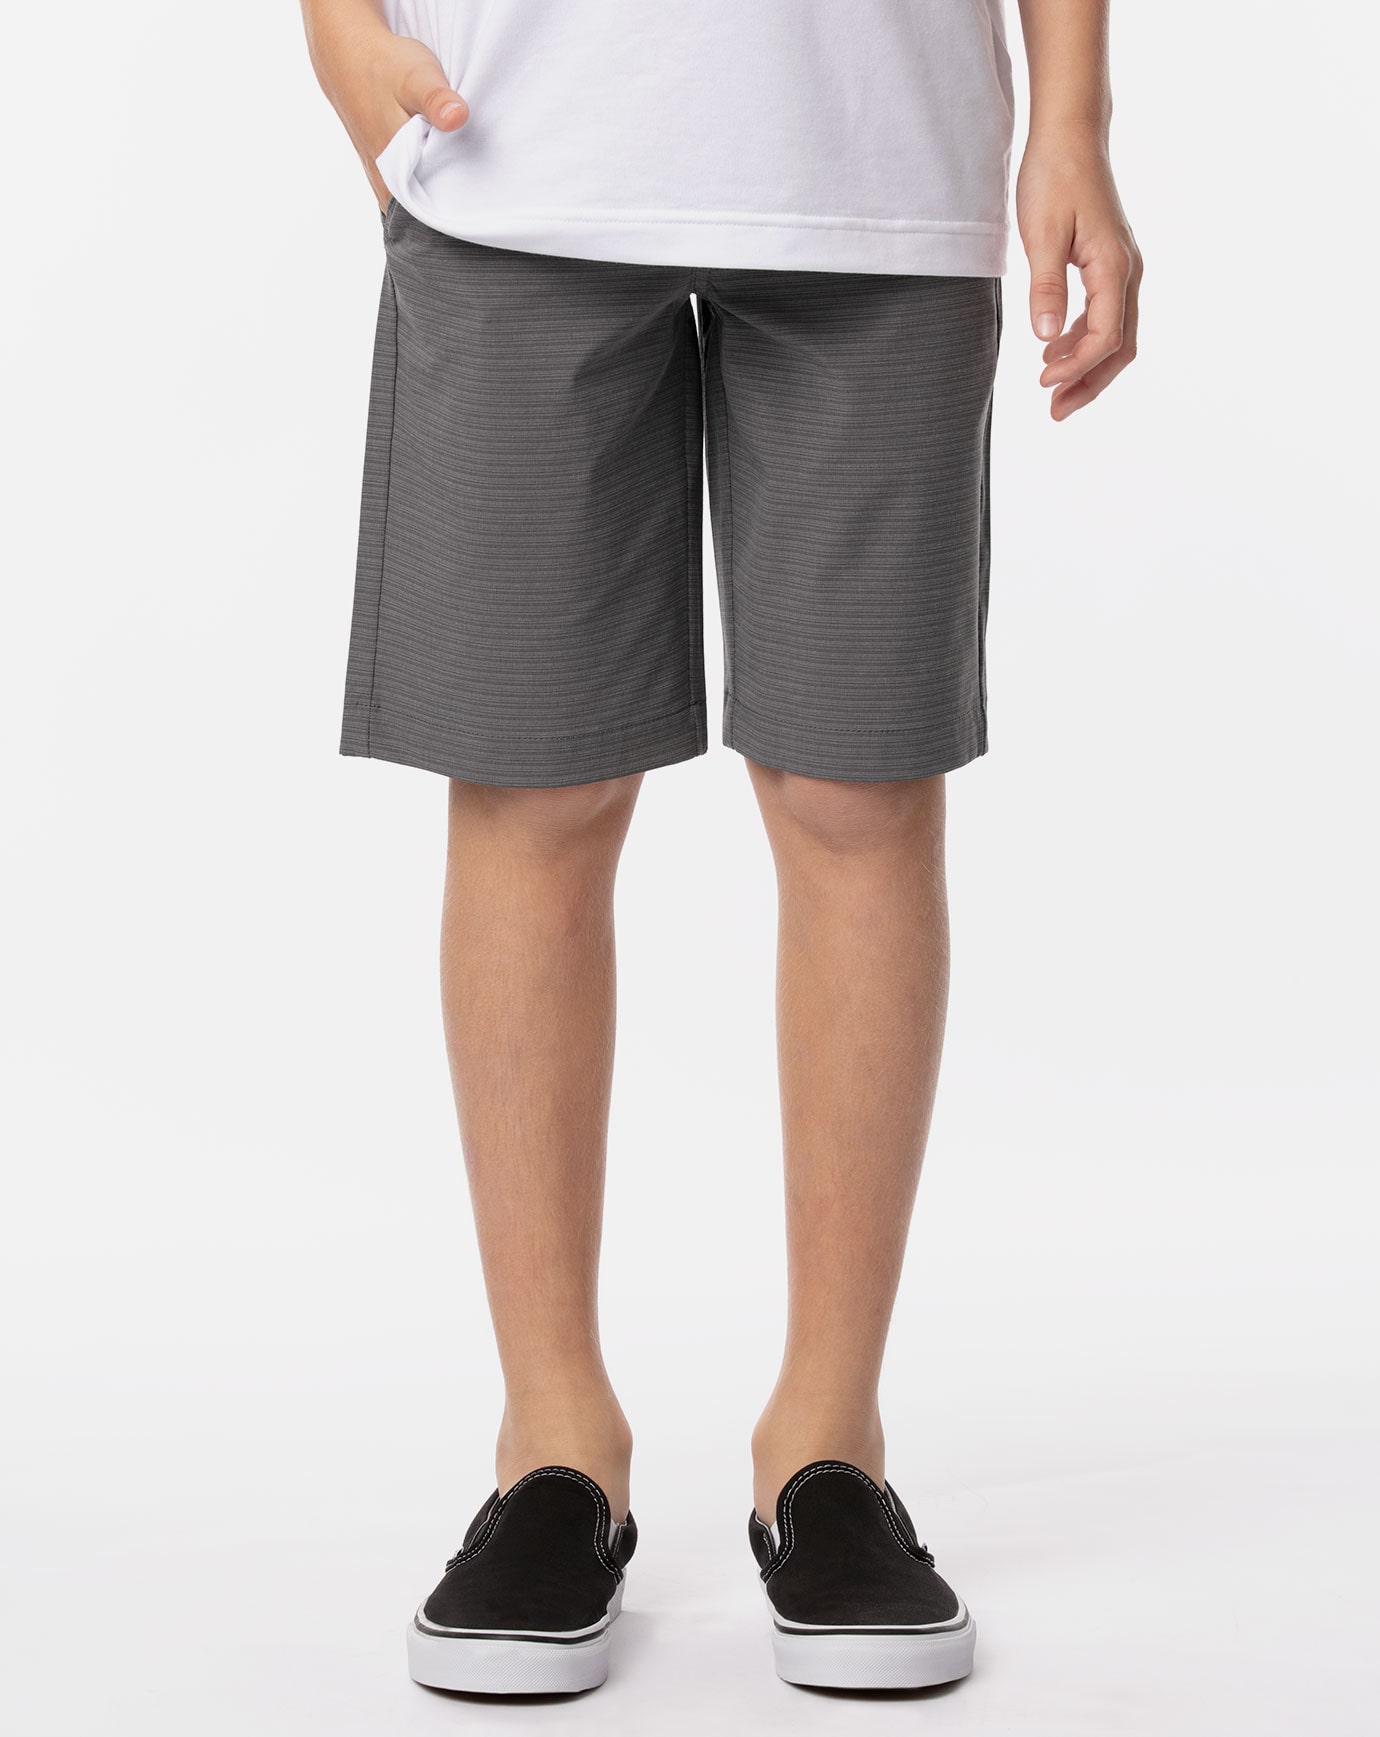 Related Product - GREY MORNING YOUTH SHORT